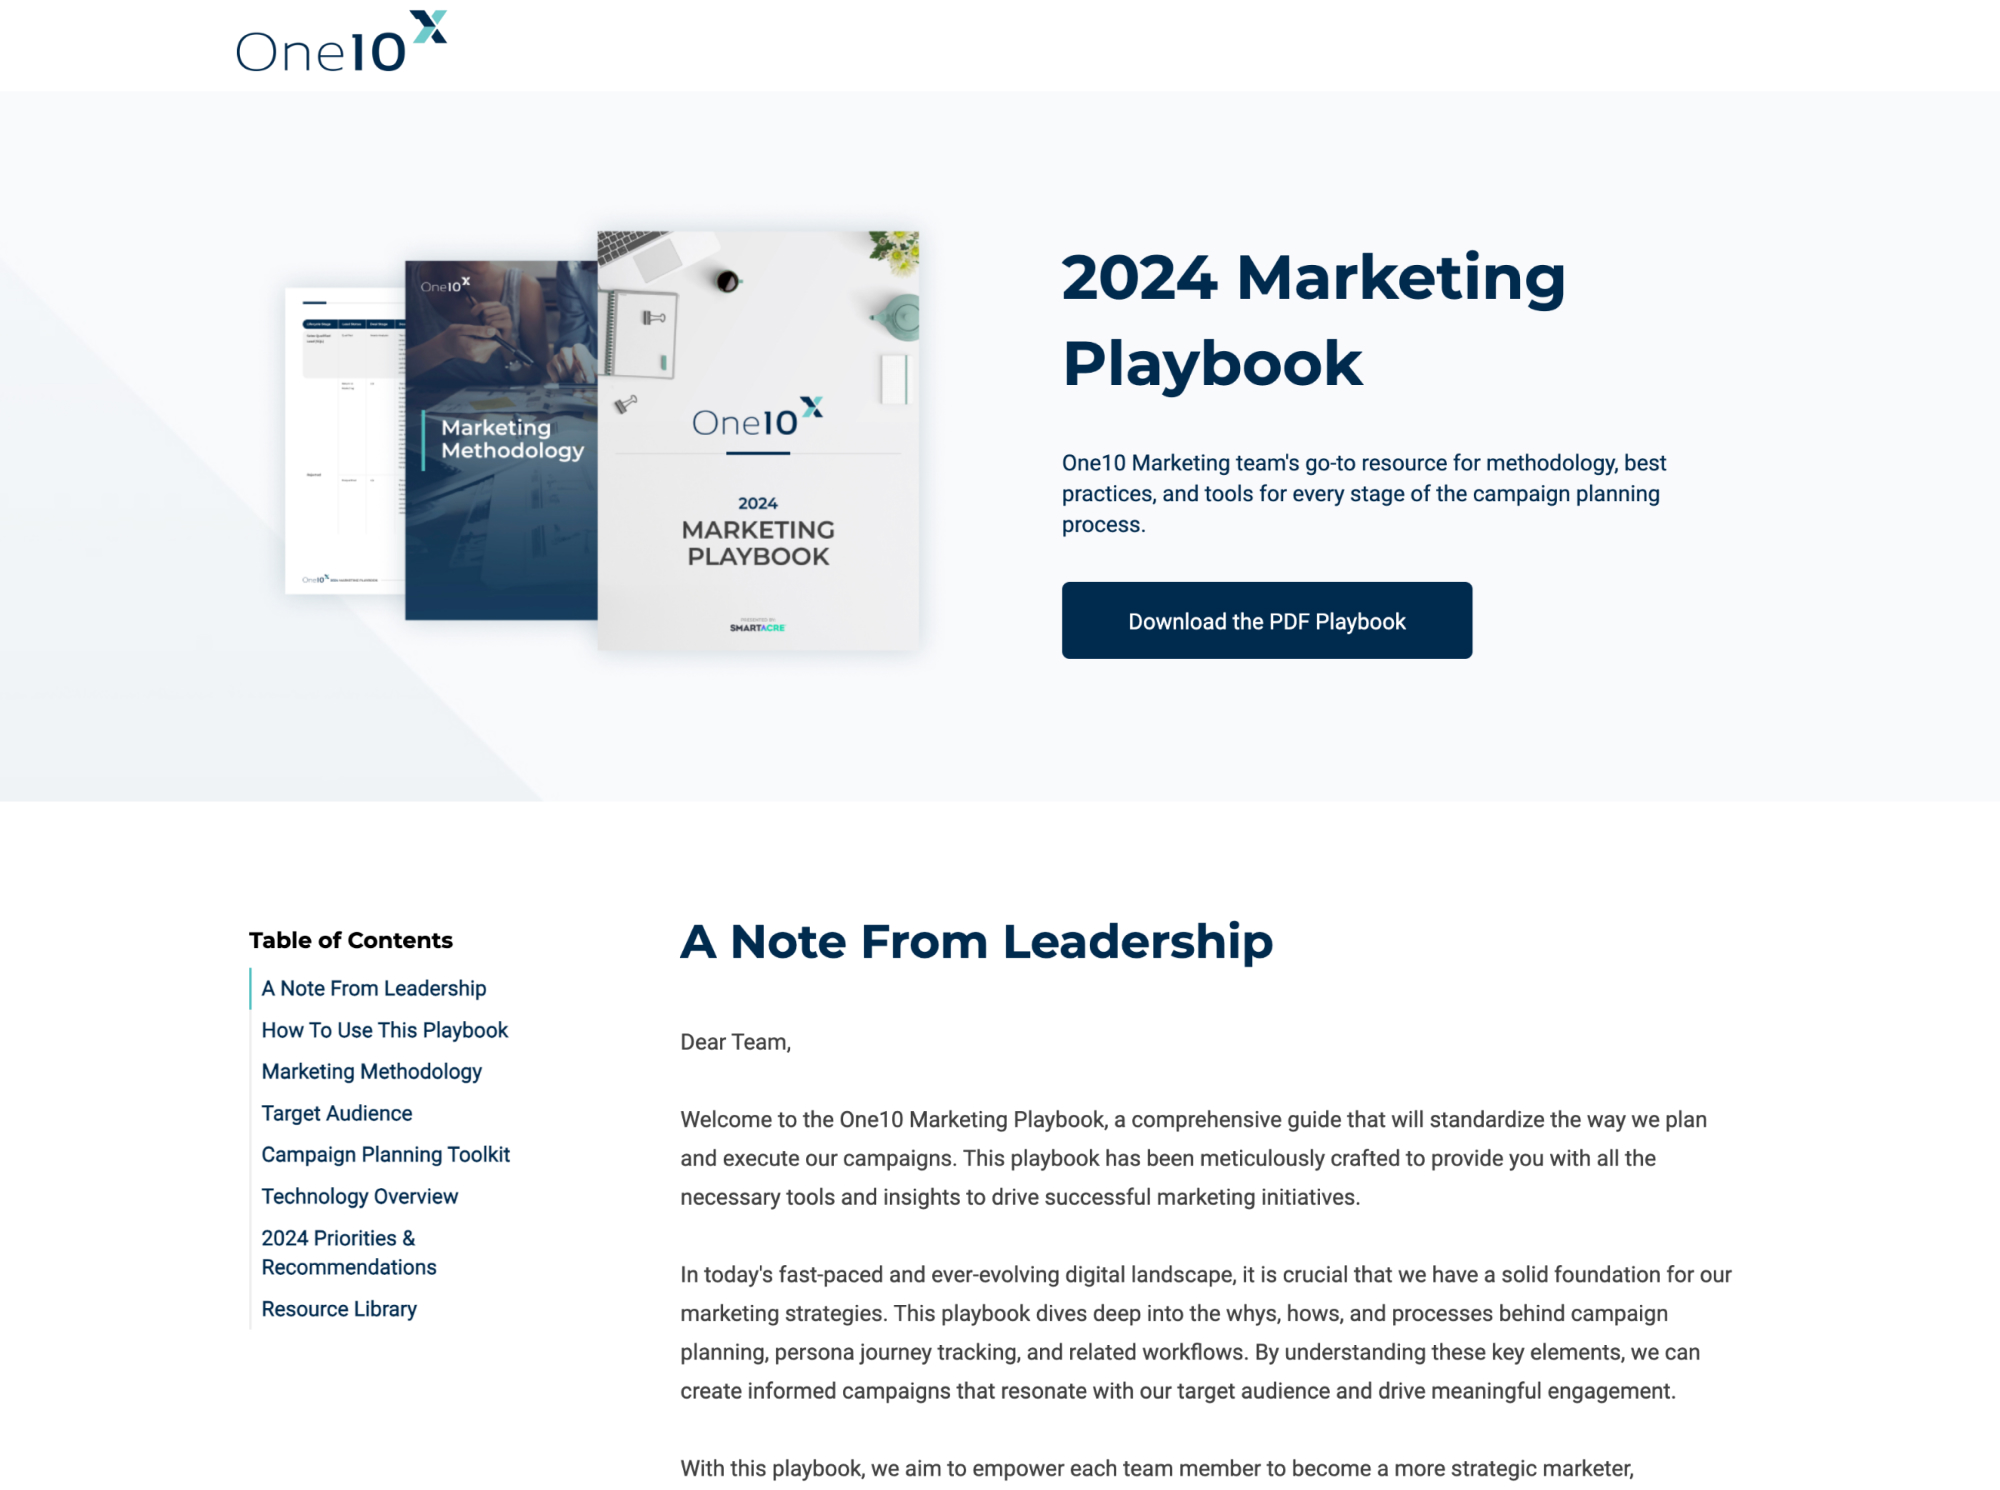 One10 Marketing Playbook Interactive Landing Page